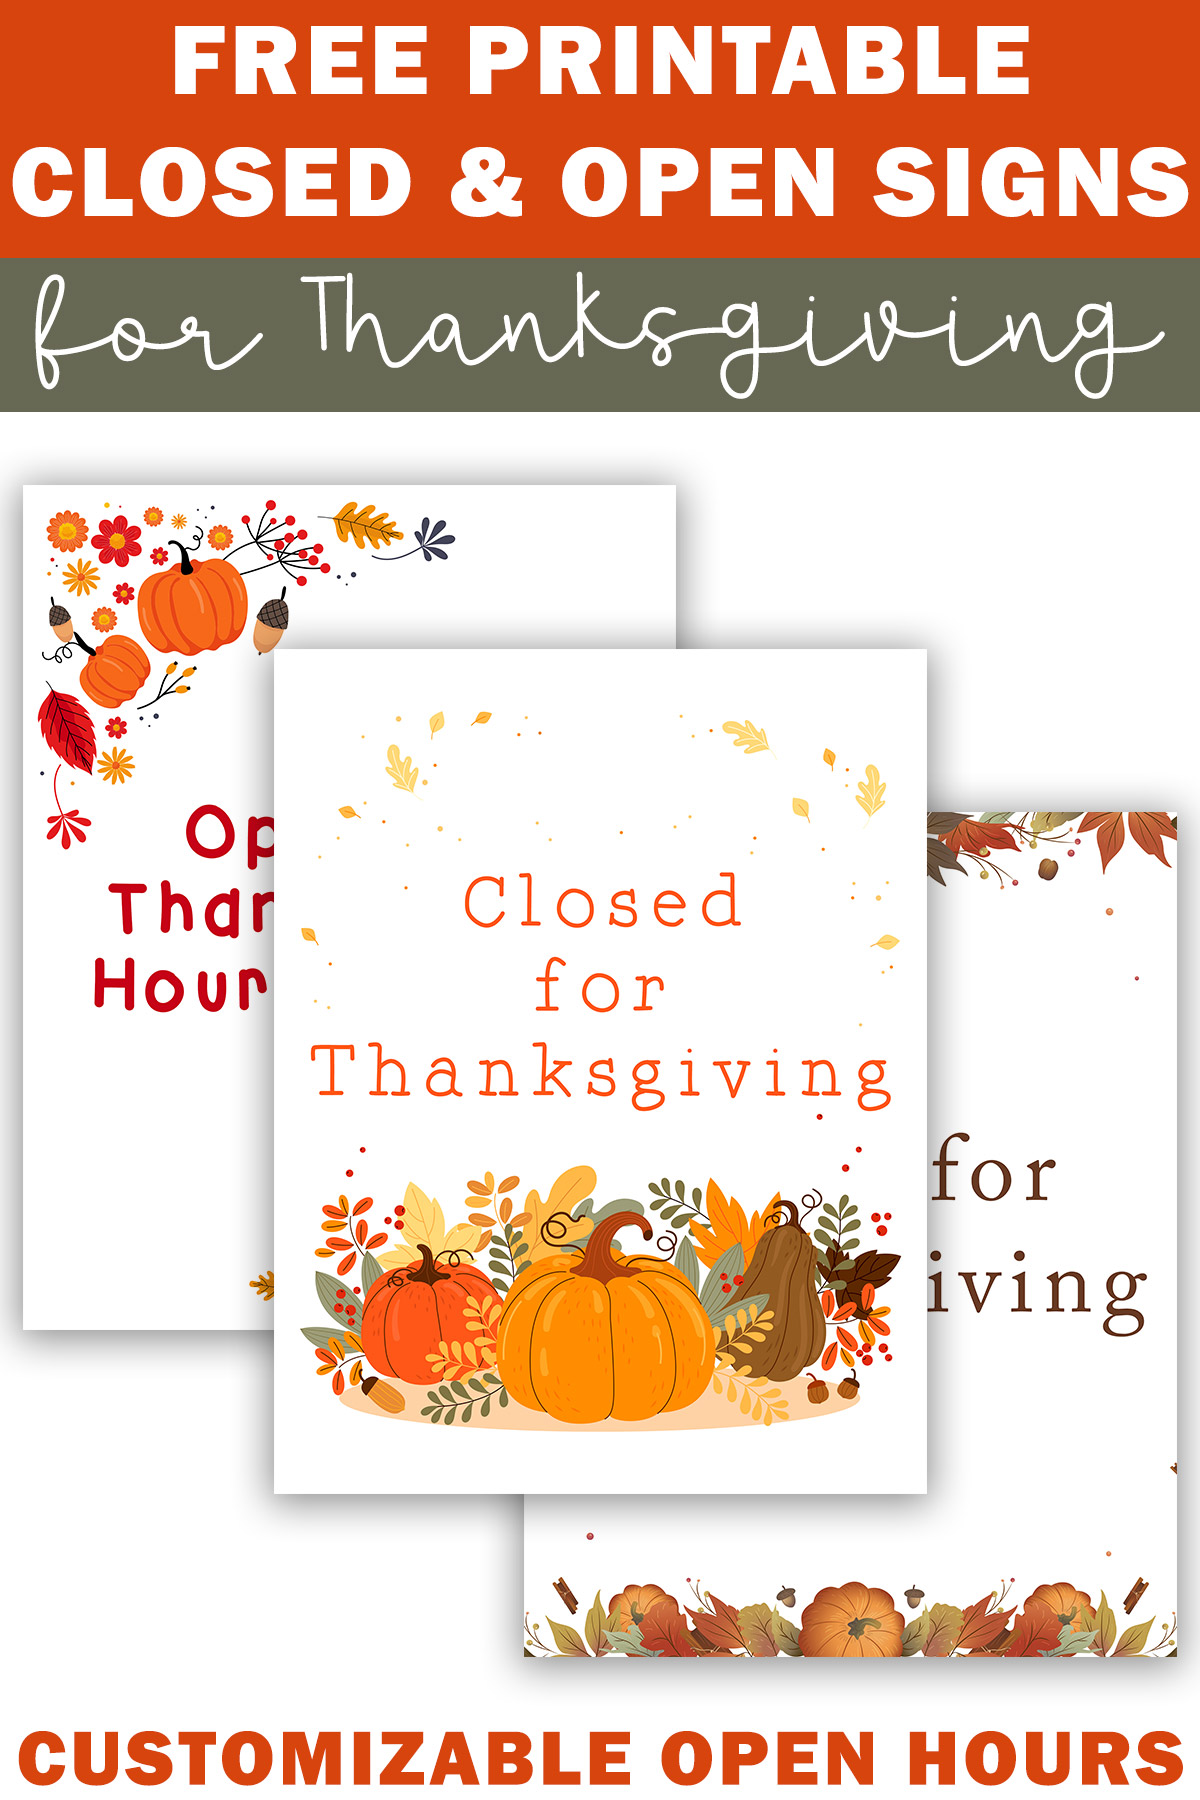 This image says free printable closed & open signs for Thanksgiving. At the bottom it says customizable open hours. In the middle are some examples of the free Closed for Thanksgiving signs. The top sign says closed for thanksgiving. You can partially read the signs under that one says Open for Thanksgiving Hours: and the other says Open for Thanksgiving.